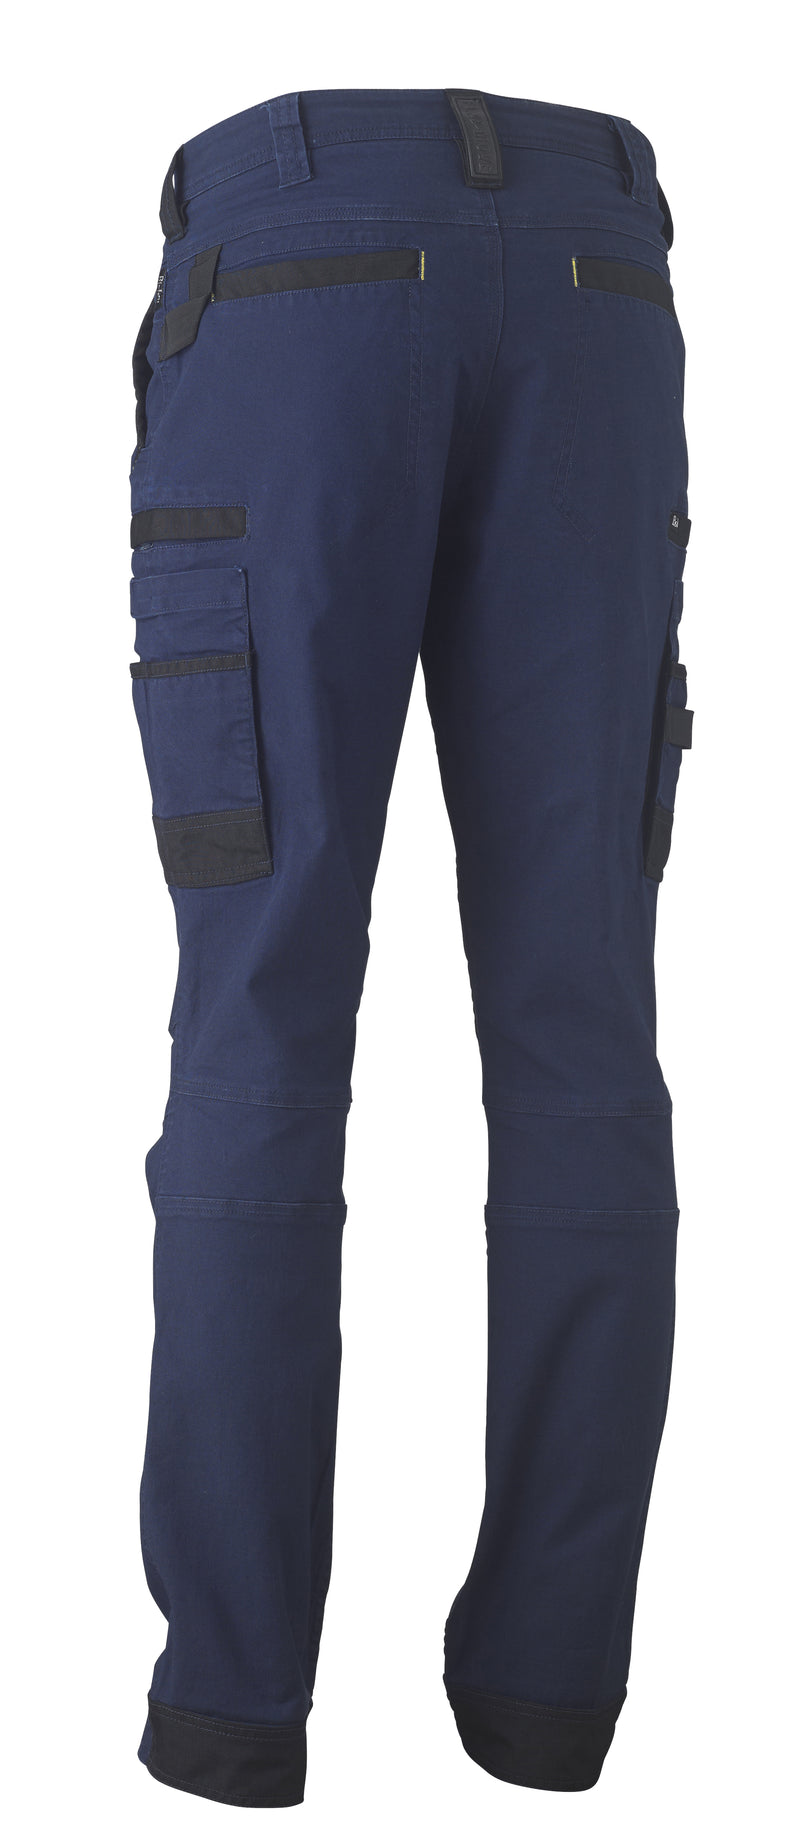 Load image into Gallery viewer, Wholesale BPC6331 Bisley Flex &amp; Move Stretch Cargo Utility Pant - Stout Printed or Blank
